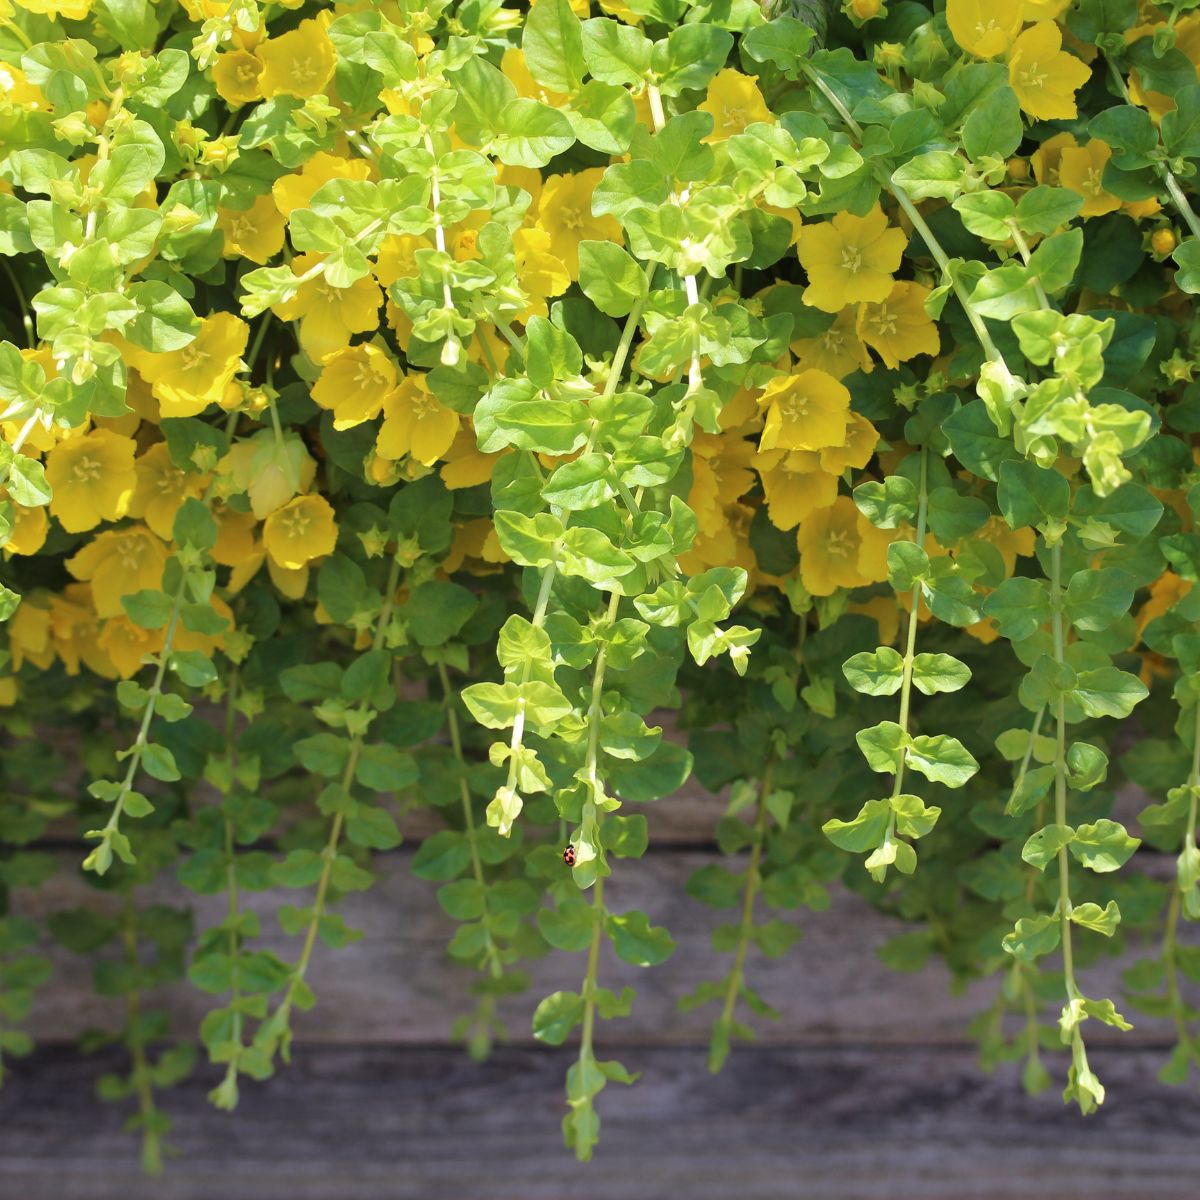 creeping Jenny vine with yellow flowers.